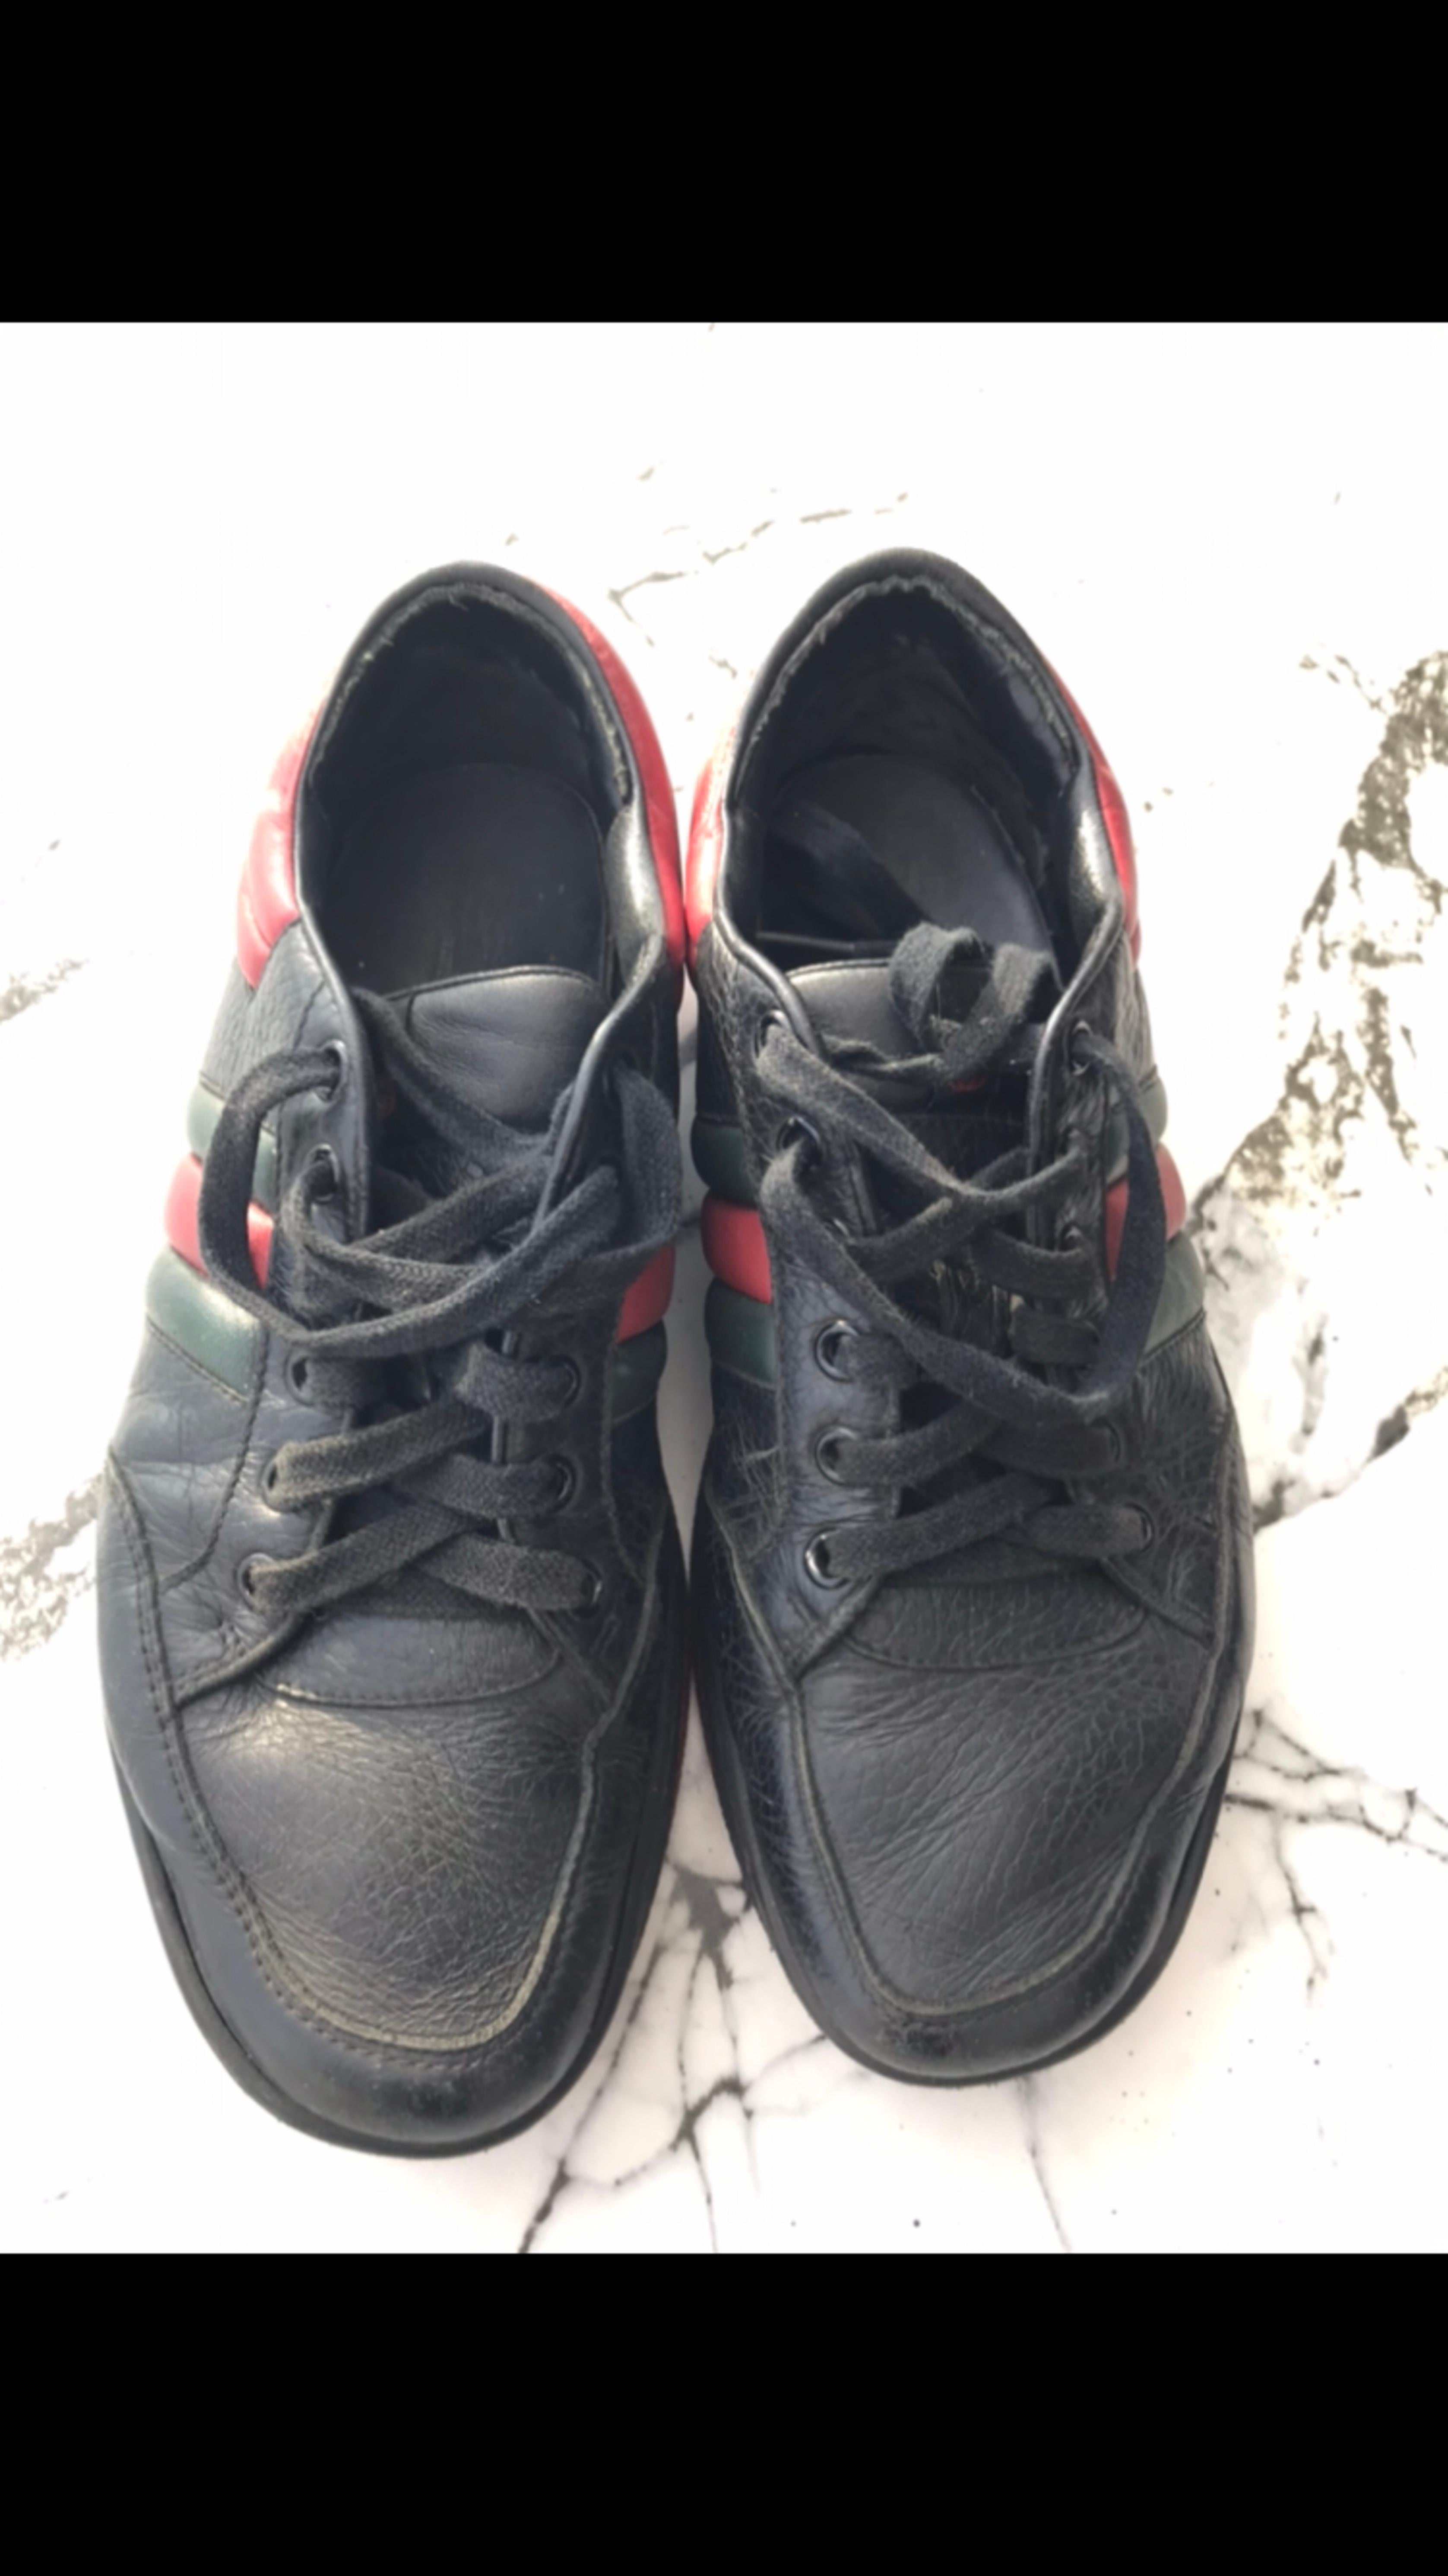 Contemporary Gucci sneakers For Sale